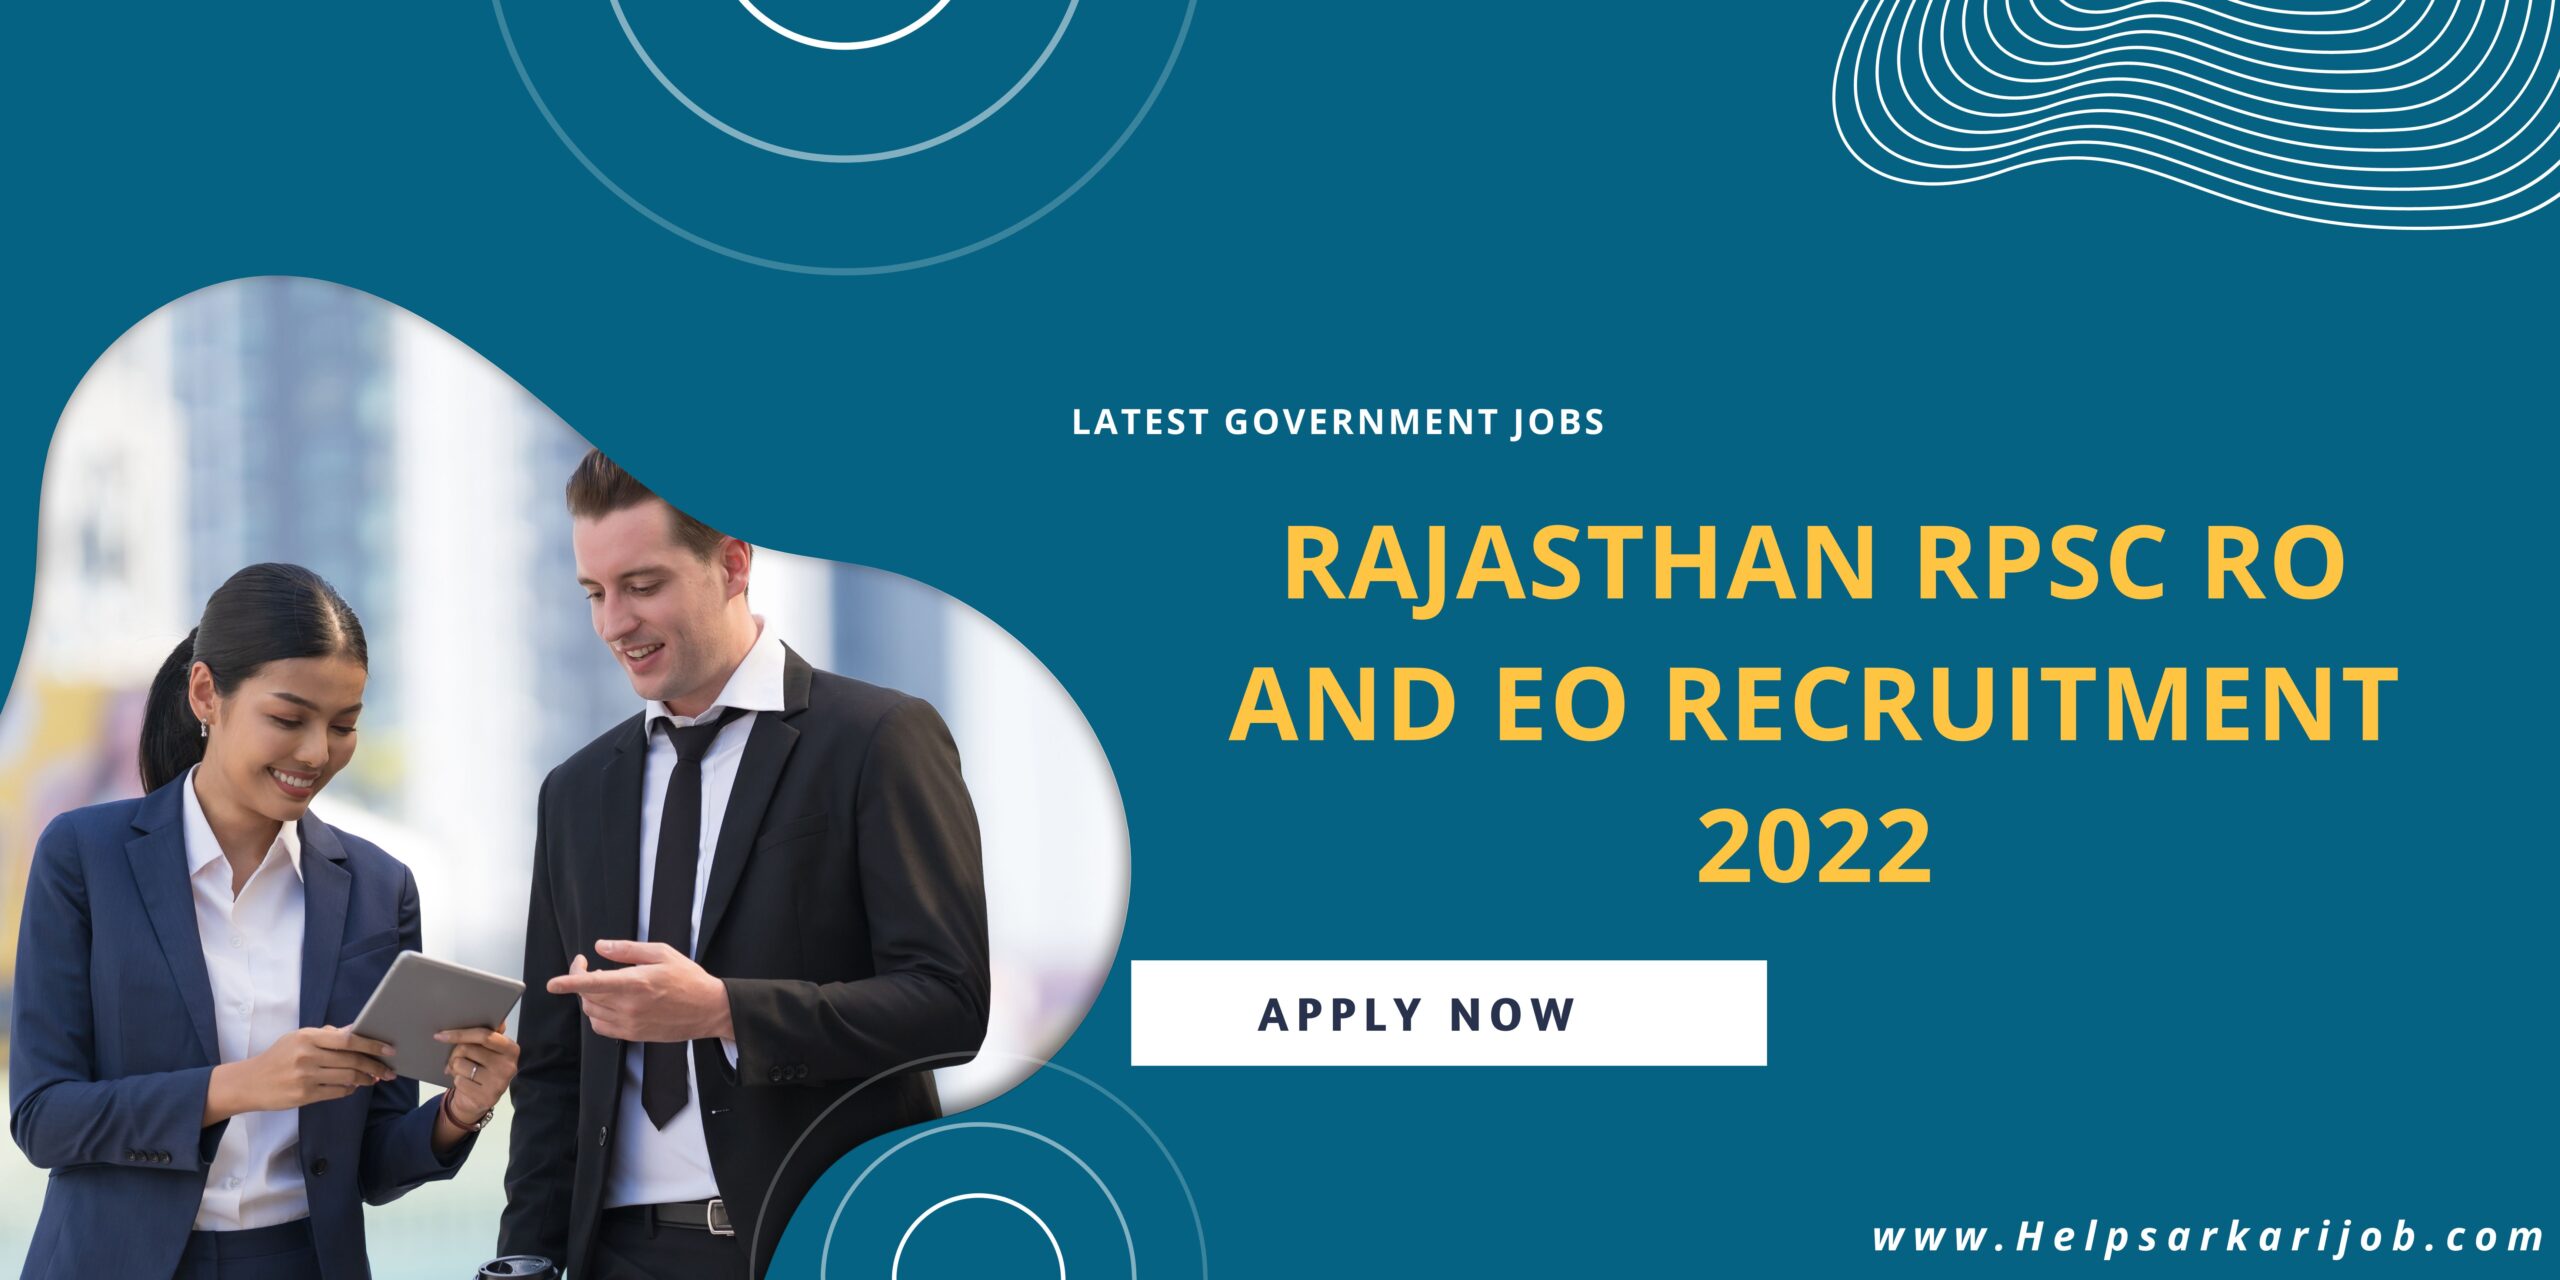 Rajasthan RPSC RO and EO Recruitment 2022